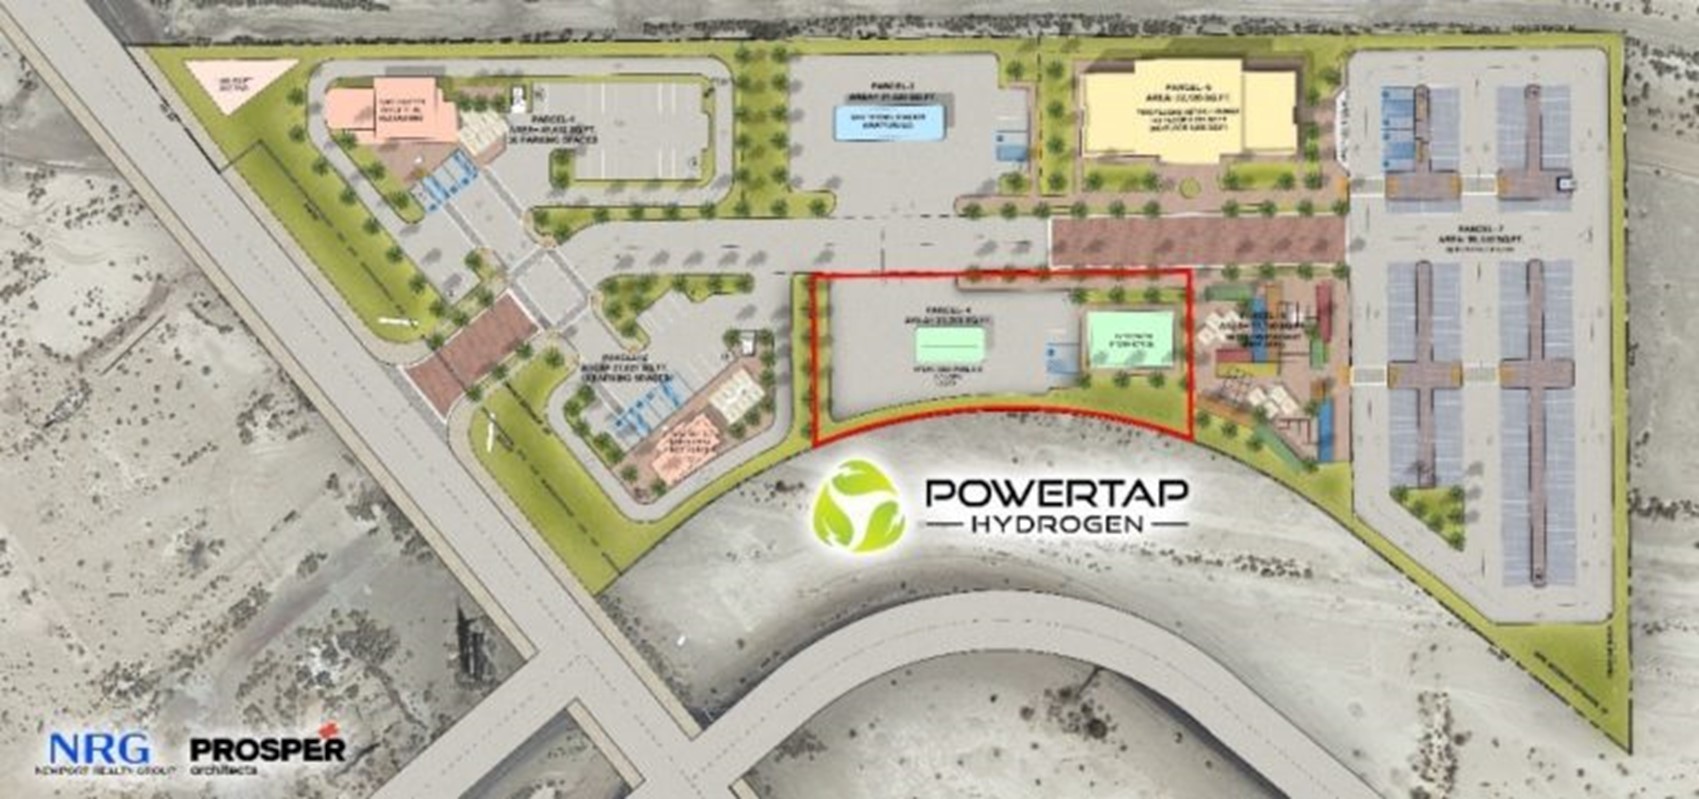 PowerTap Enters Letter of Intent With Newport Realty Group for Future Hydrogen Fueling Station in Yermo, California